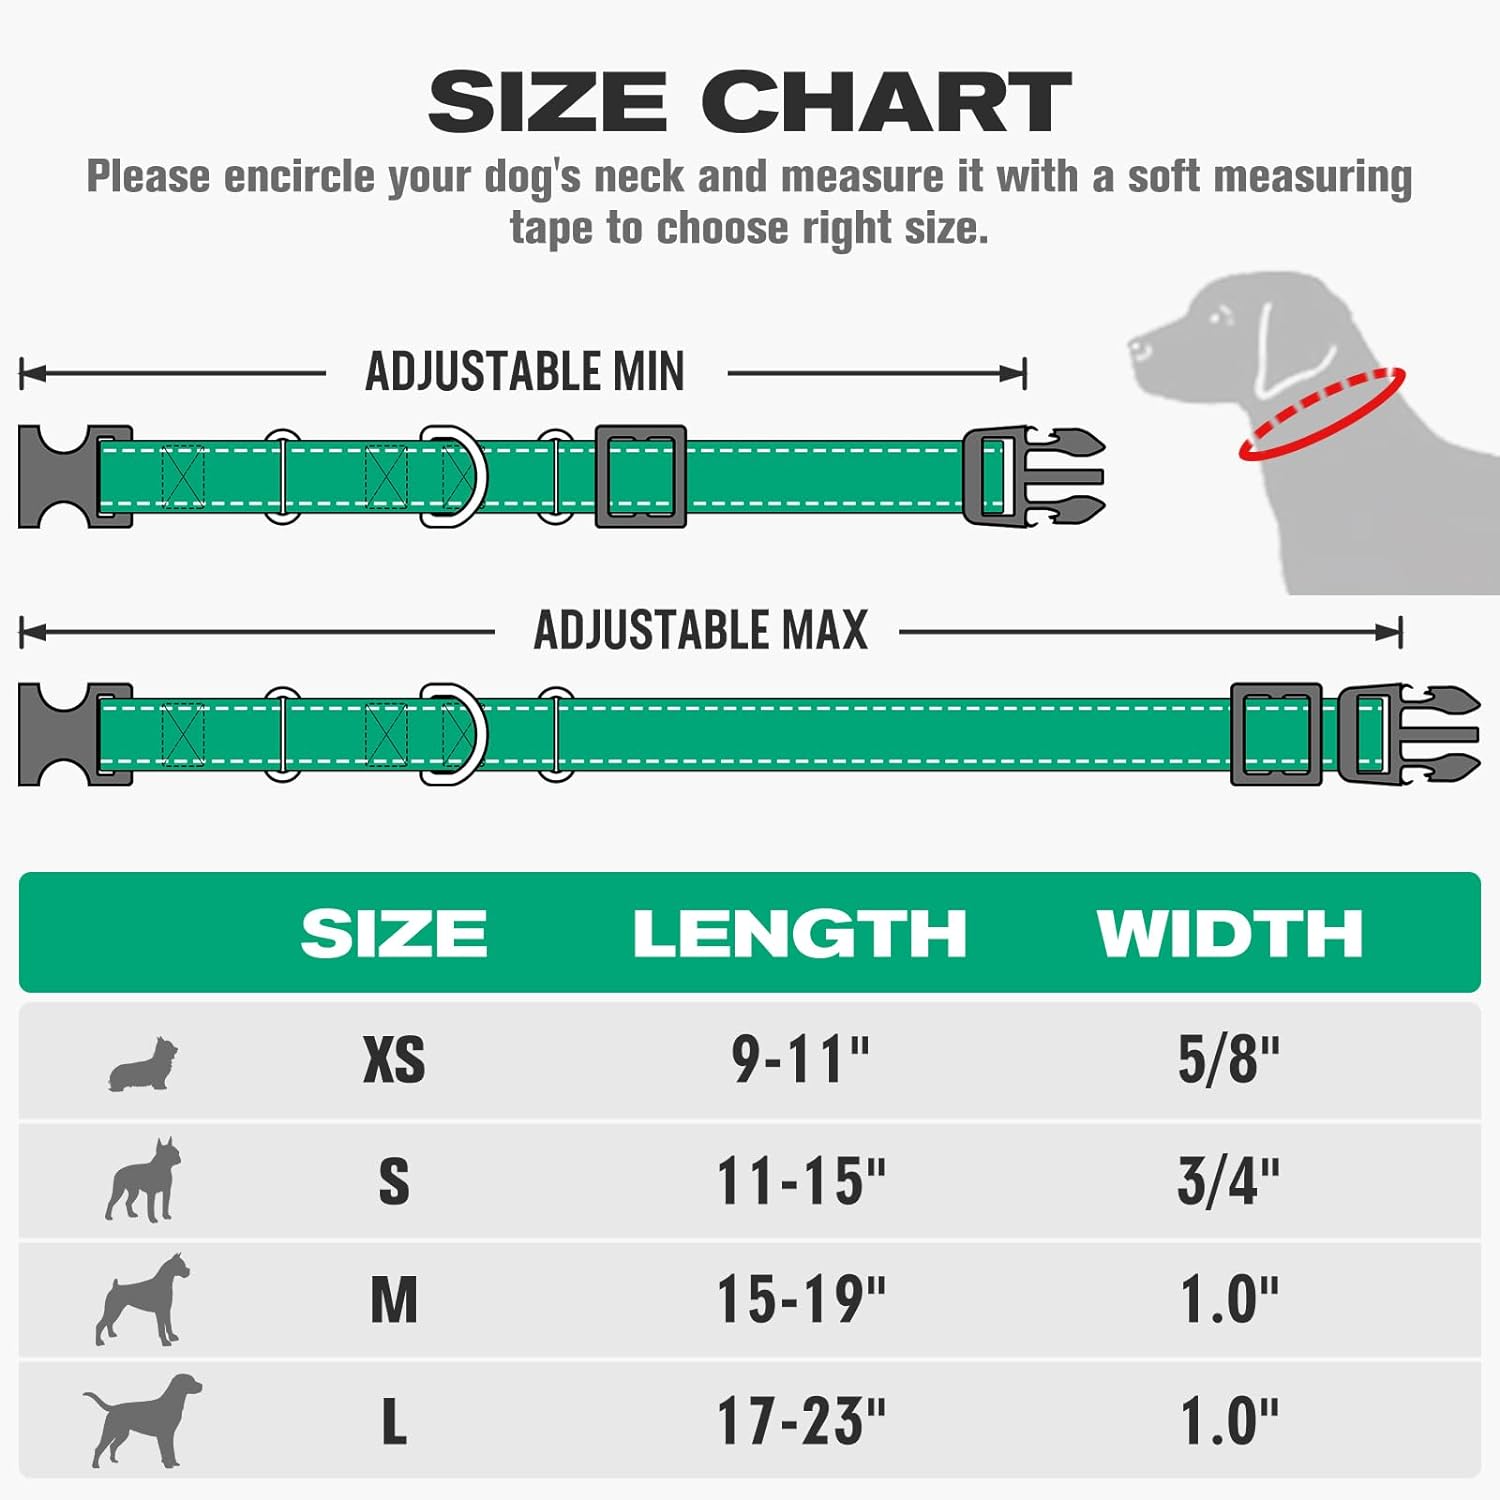 Joytale Martingale Collar for Dogs, Reflective Heavy Duty Dog Collar for Safety, Quick Release Buckle, Adjustable Nylon Collars for Medium Dogs Walking Training, Teal,M